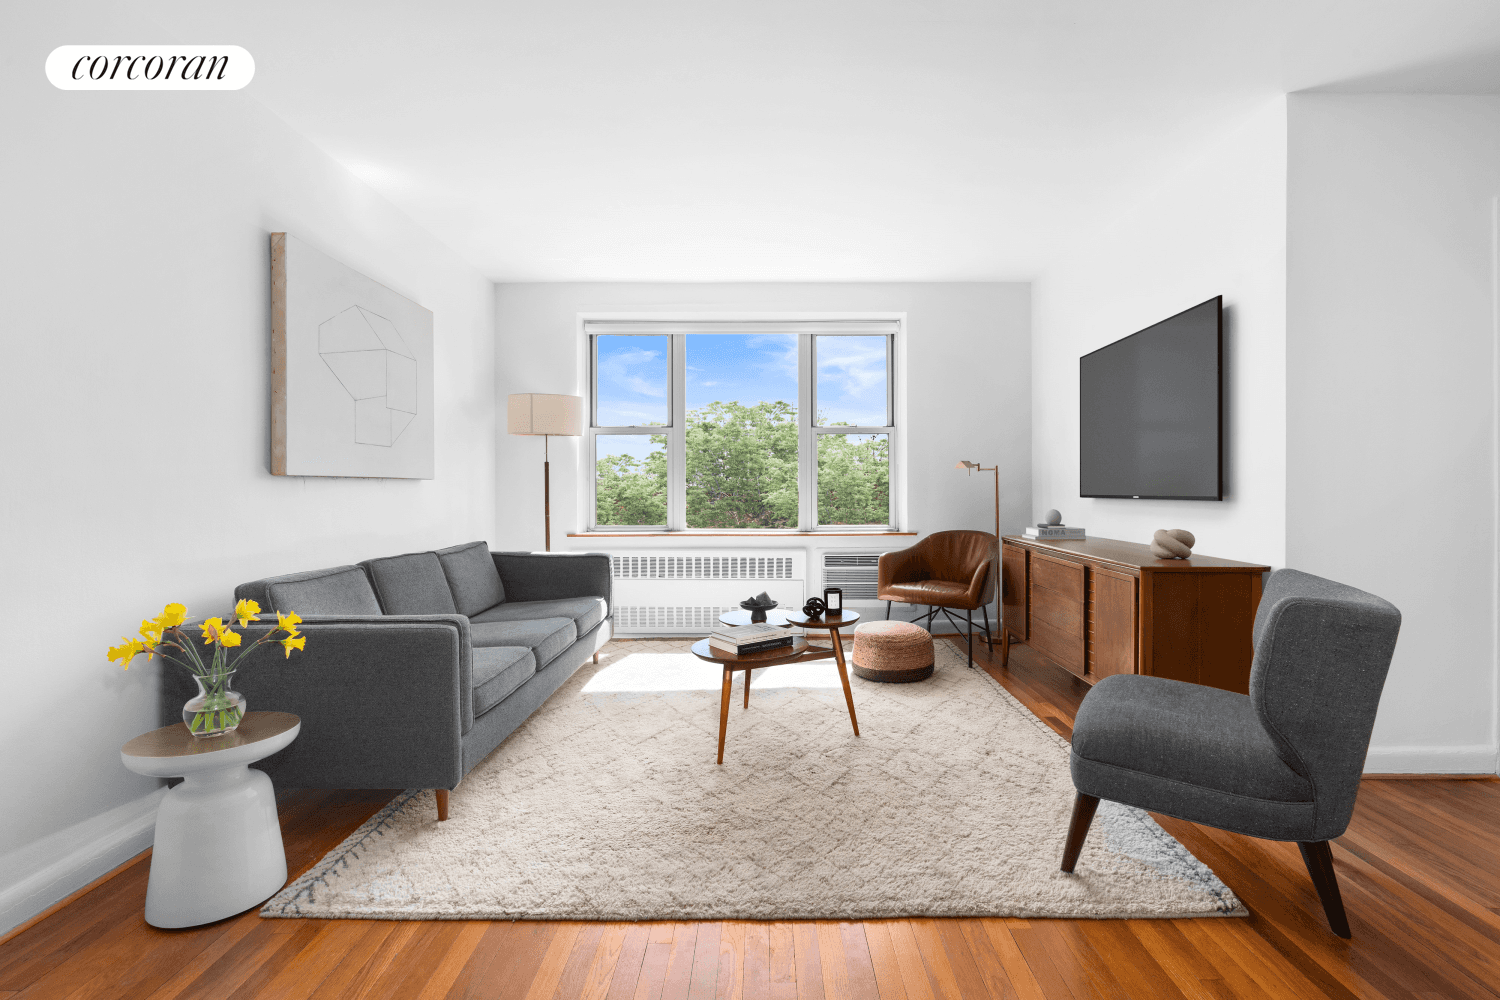 Welcome to 45 Grace Court 6C This bright and expansive apartment is located on one of the most charming blocks in Brooklyn Heights just steps to the Promenade.